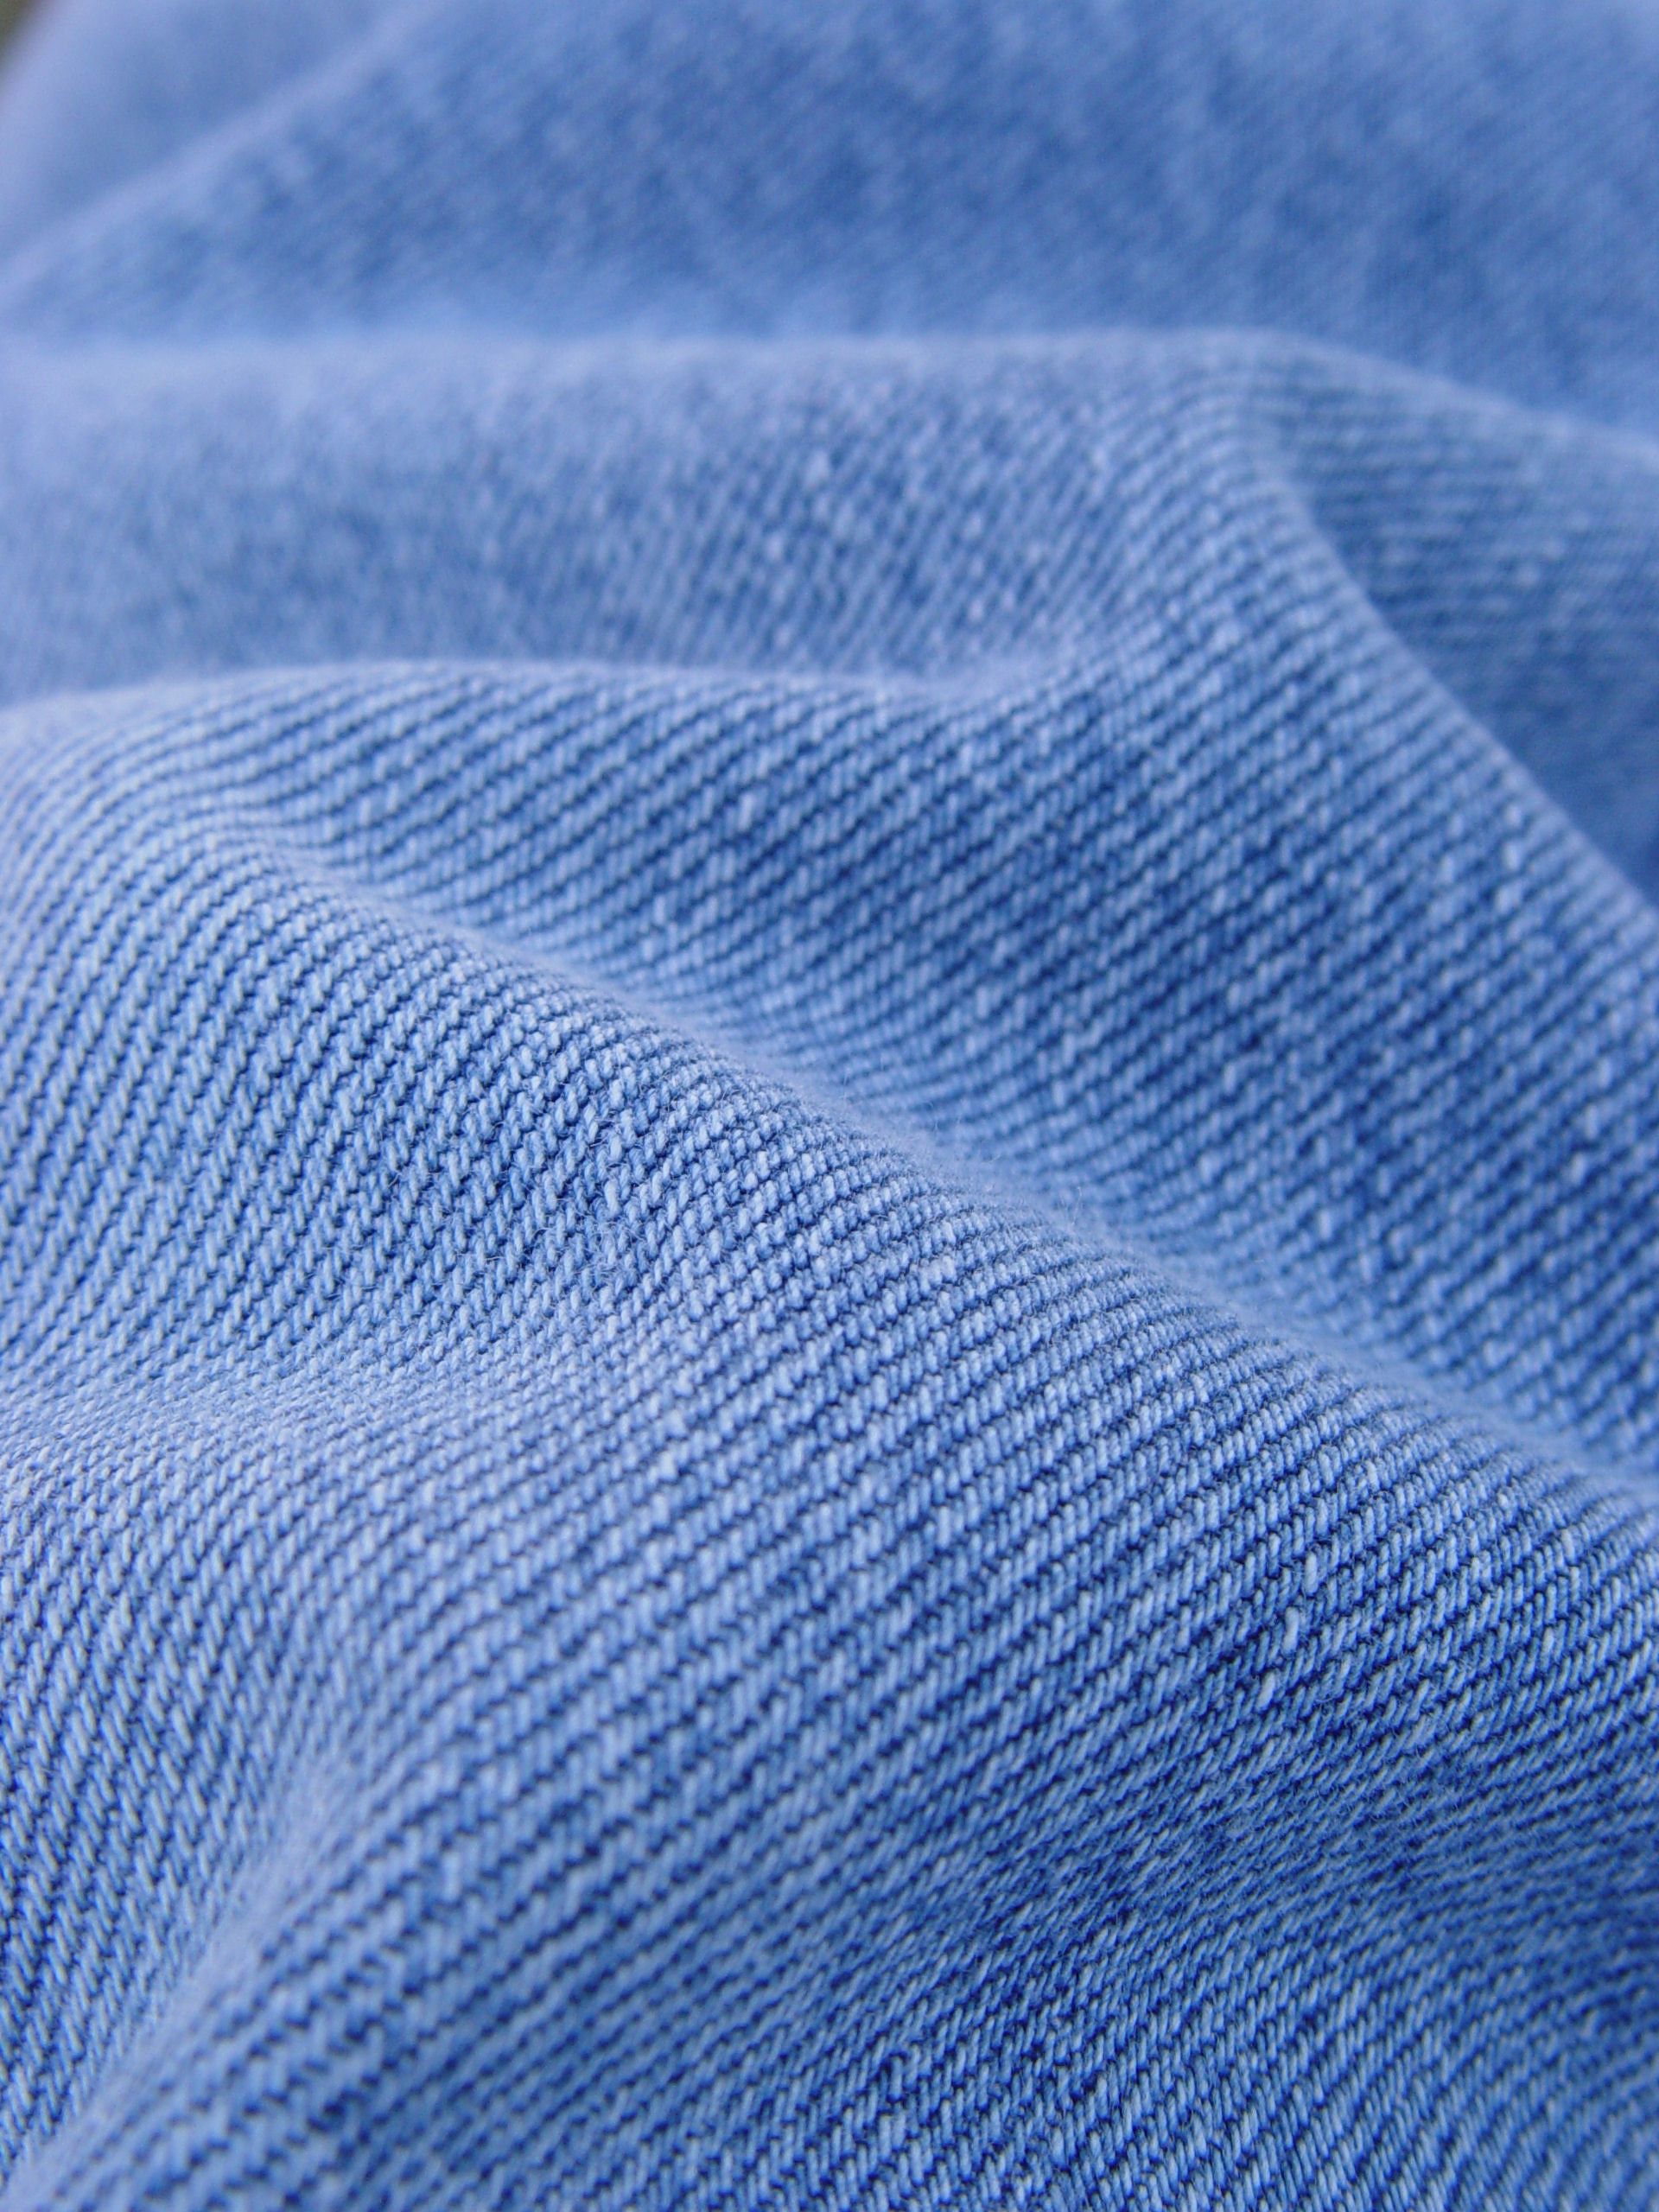 textures, jeans, folds, texture, cloth, pleating